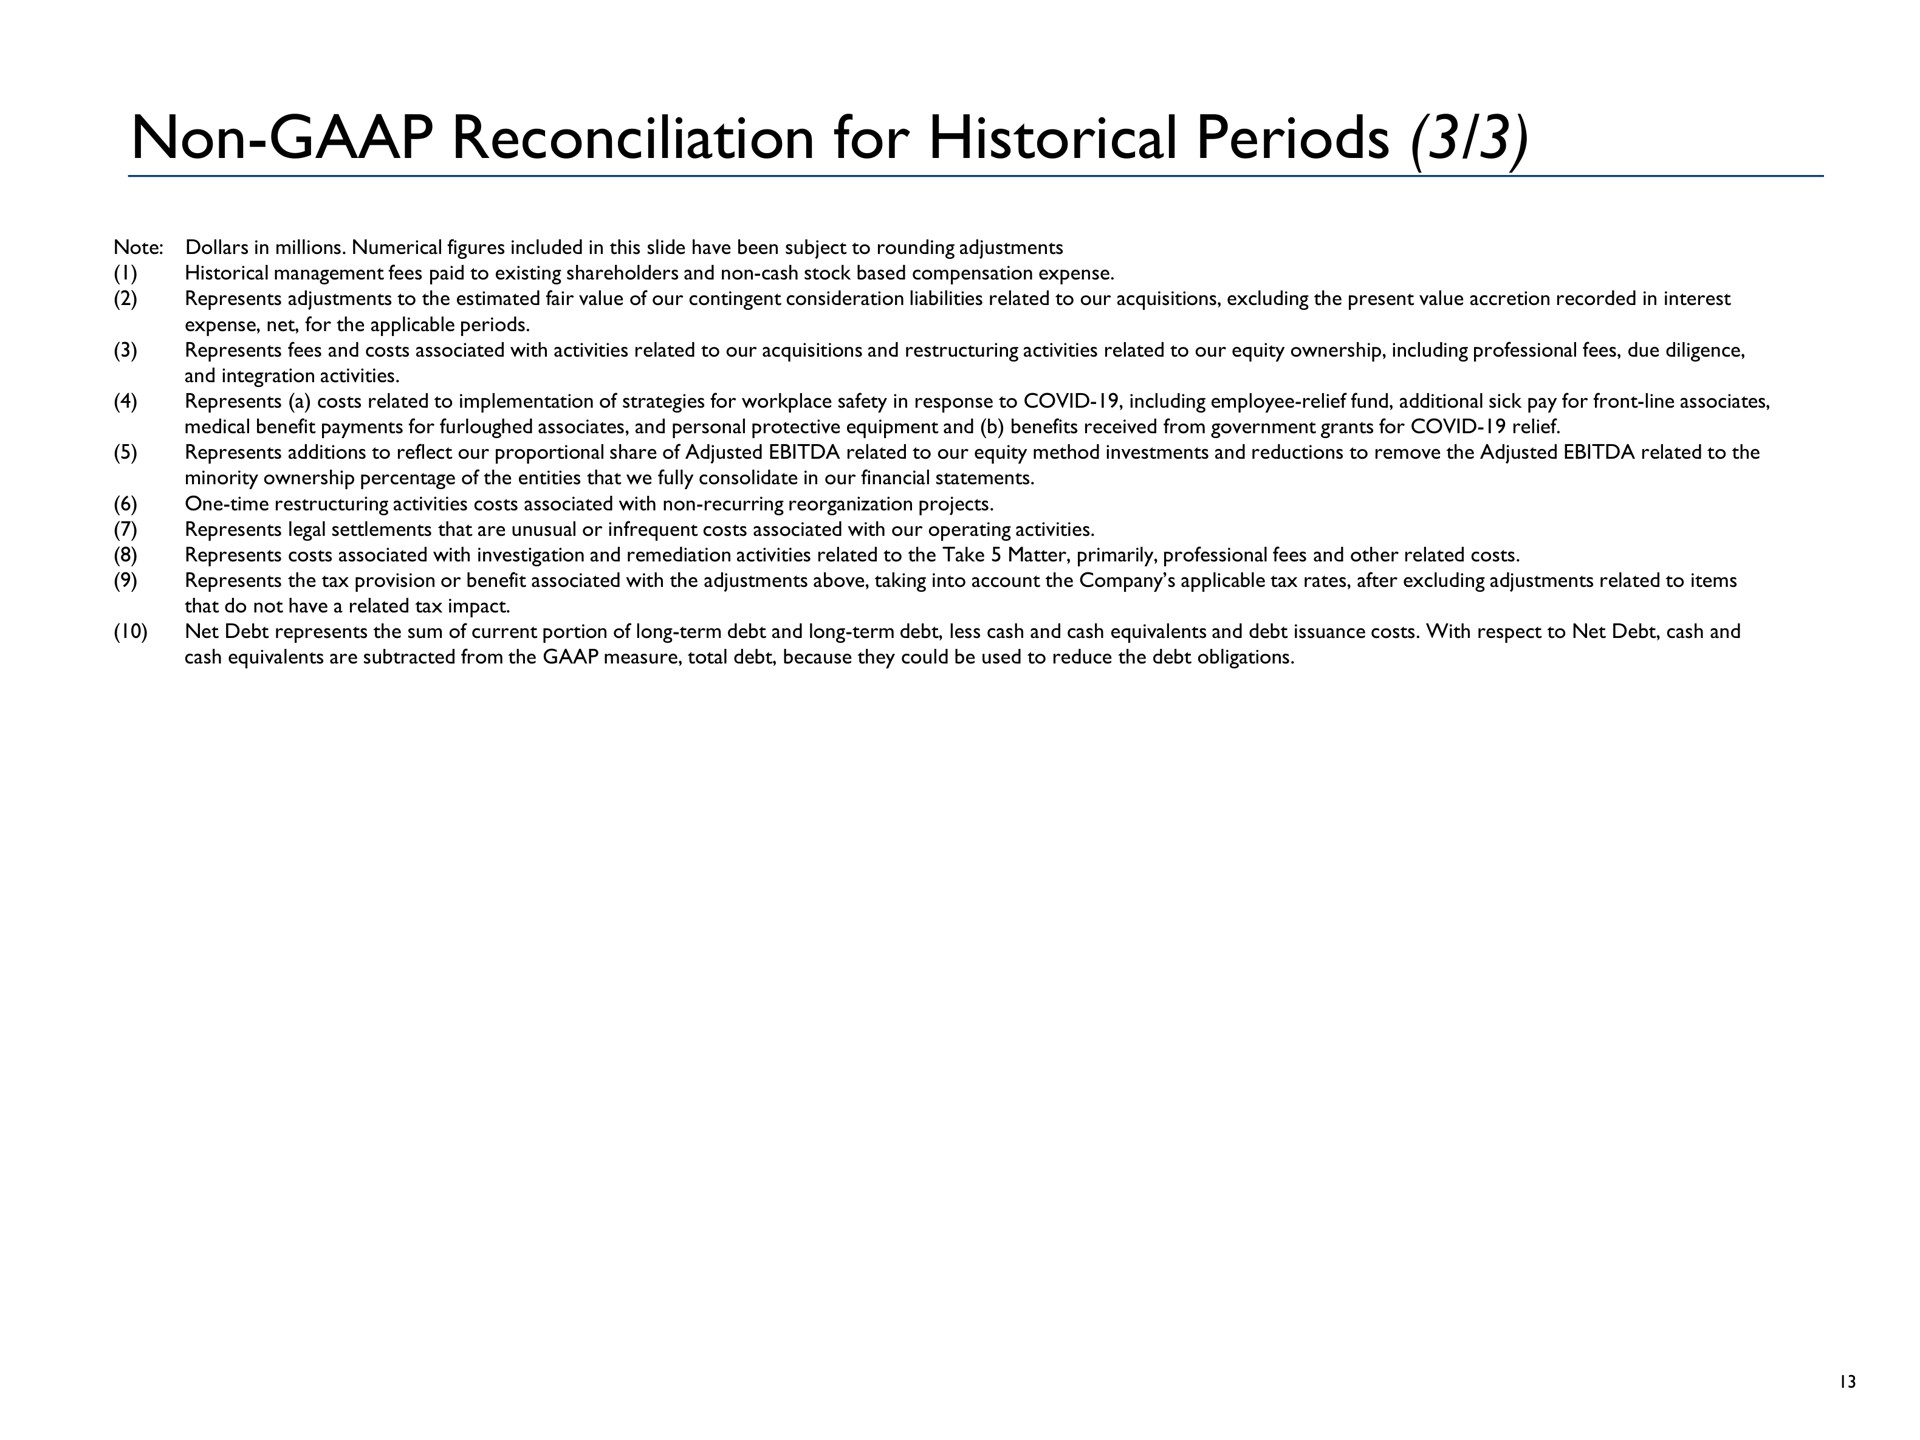 non reconciliation for historical periods note dollars in millions numerical figures included in this slide have been subject to rounding adjustments management fees paid to existing shareholders and non cash stock based compensation expense represents adjustments to the estimated fair value of our contingent consideration liabilities related to our acquisitions excluding the present value accretion recorded in interest expense net the applicable represents fees and costs associated with activities related to our acquisitions and activities related to our equity ownership including professional fees due diligence and integration activities represents a costs related to implementation of strategies workplace safety in response to covid including employee relief fund additional sick pay front line associates medical benefit payments furloughed associates and personal protective equipment and benefits received from government grants covid i relief represents additions to reflect our proportional share of adjusted related to our equity method investments and reductions to remove the adjusted related to the minority ownership percentage of the entities that we fully consolidate in our financial statements one time activities costs associated with non recurring reorganization projects represents legal settlements that are unusual or infrequent costs associated with our operating activities represents costs associated with investigation and remediation activities related to the take matter primarily professional fees and other related costs represents the tax provision or benefit associated with the adjustments above taking into account the company applicable tax rates after excluding adjustments related to items that do not have a related tax impact net debt represents the sum of current portion of long term debt and long term debt less cash and cash equivalents and debt issuance costs with respect to net debt cash and cash equivalents are subtracted from the measure total debt because they could be used to reduce the debt obligations | Advantage Solutions